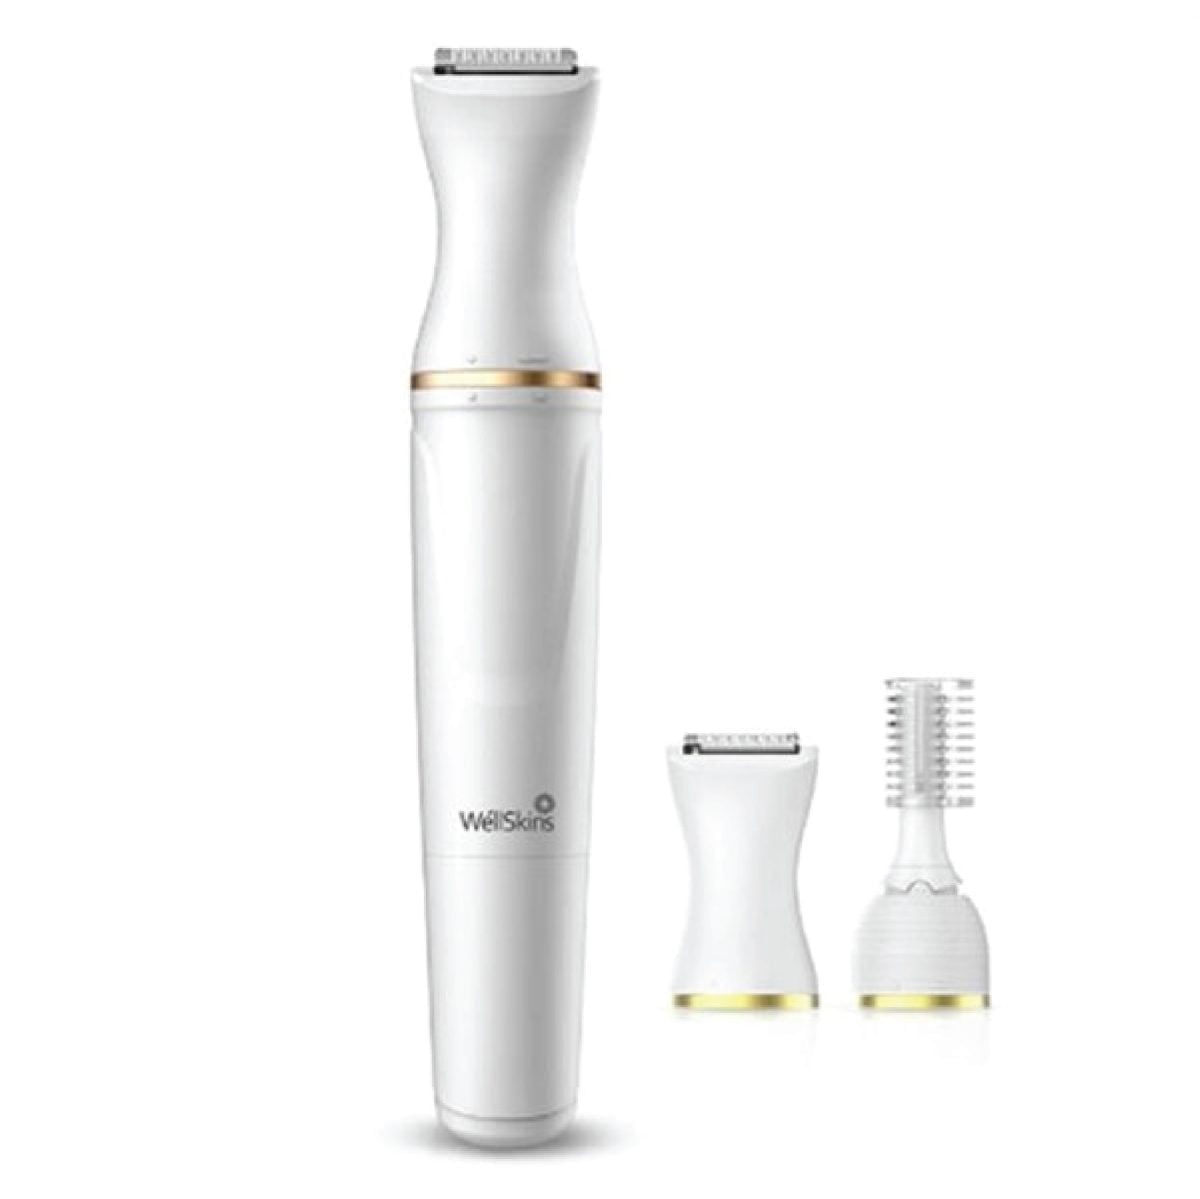 T3 06 Xiaomi Xiao Mi Youpin Wéllskins Electric Trimmer Repairer Shaver Body Hair Removal With Pivoting Head 30° Adjustable Cutter Head Hair Remover For Women Painless Lady Shaver 6-In-1 Https://Www.youtube.com/Watch?V=N-Wn12U3Uj4 Xiaomi Wellskins Wx-Tm01 Personal Beauty Trimmer